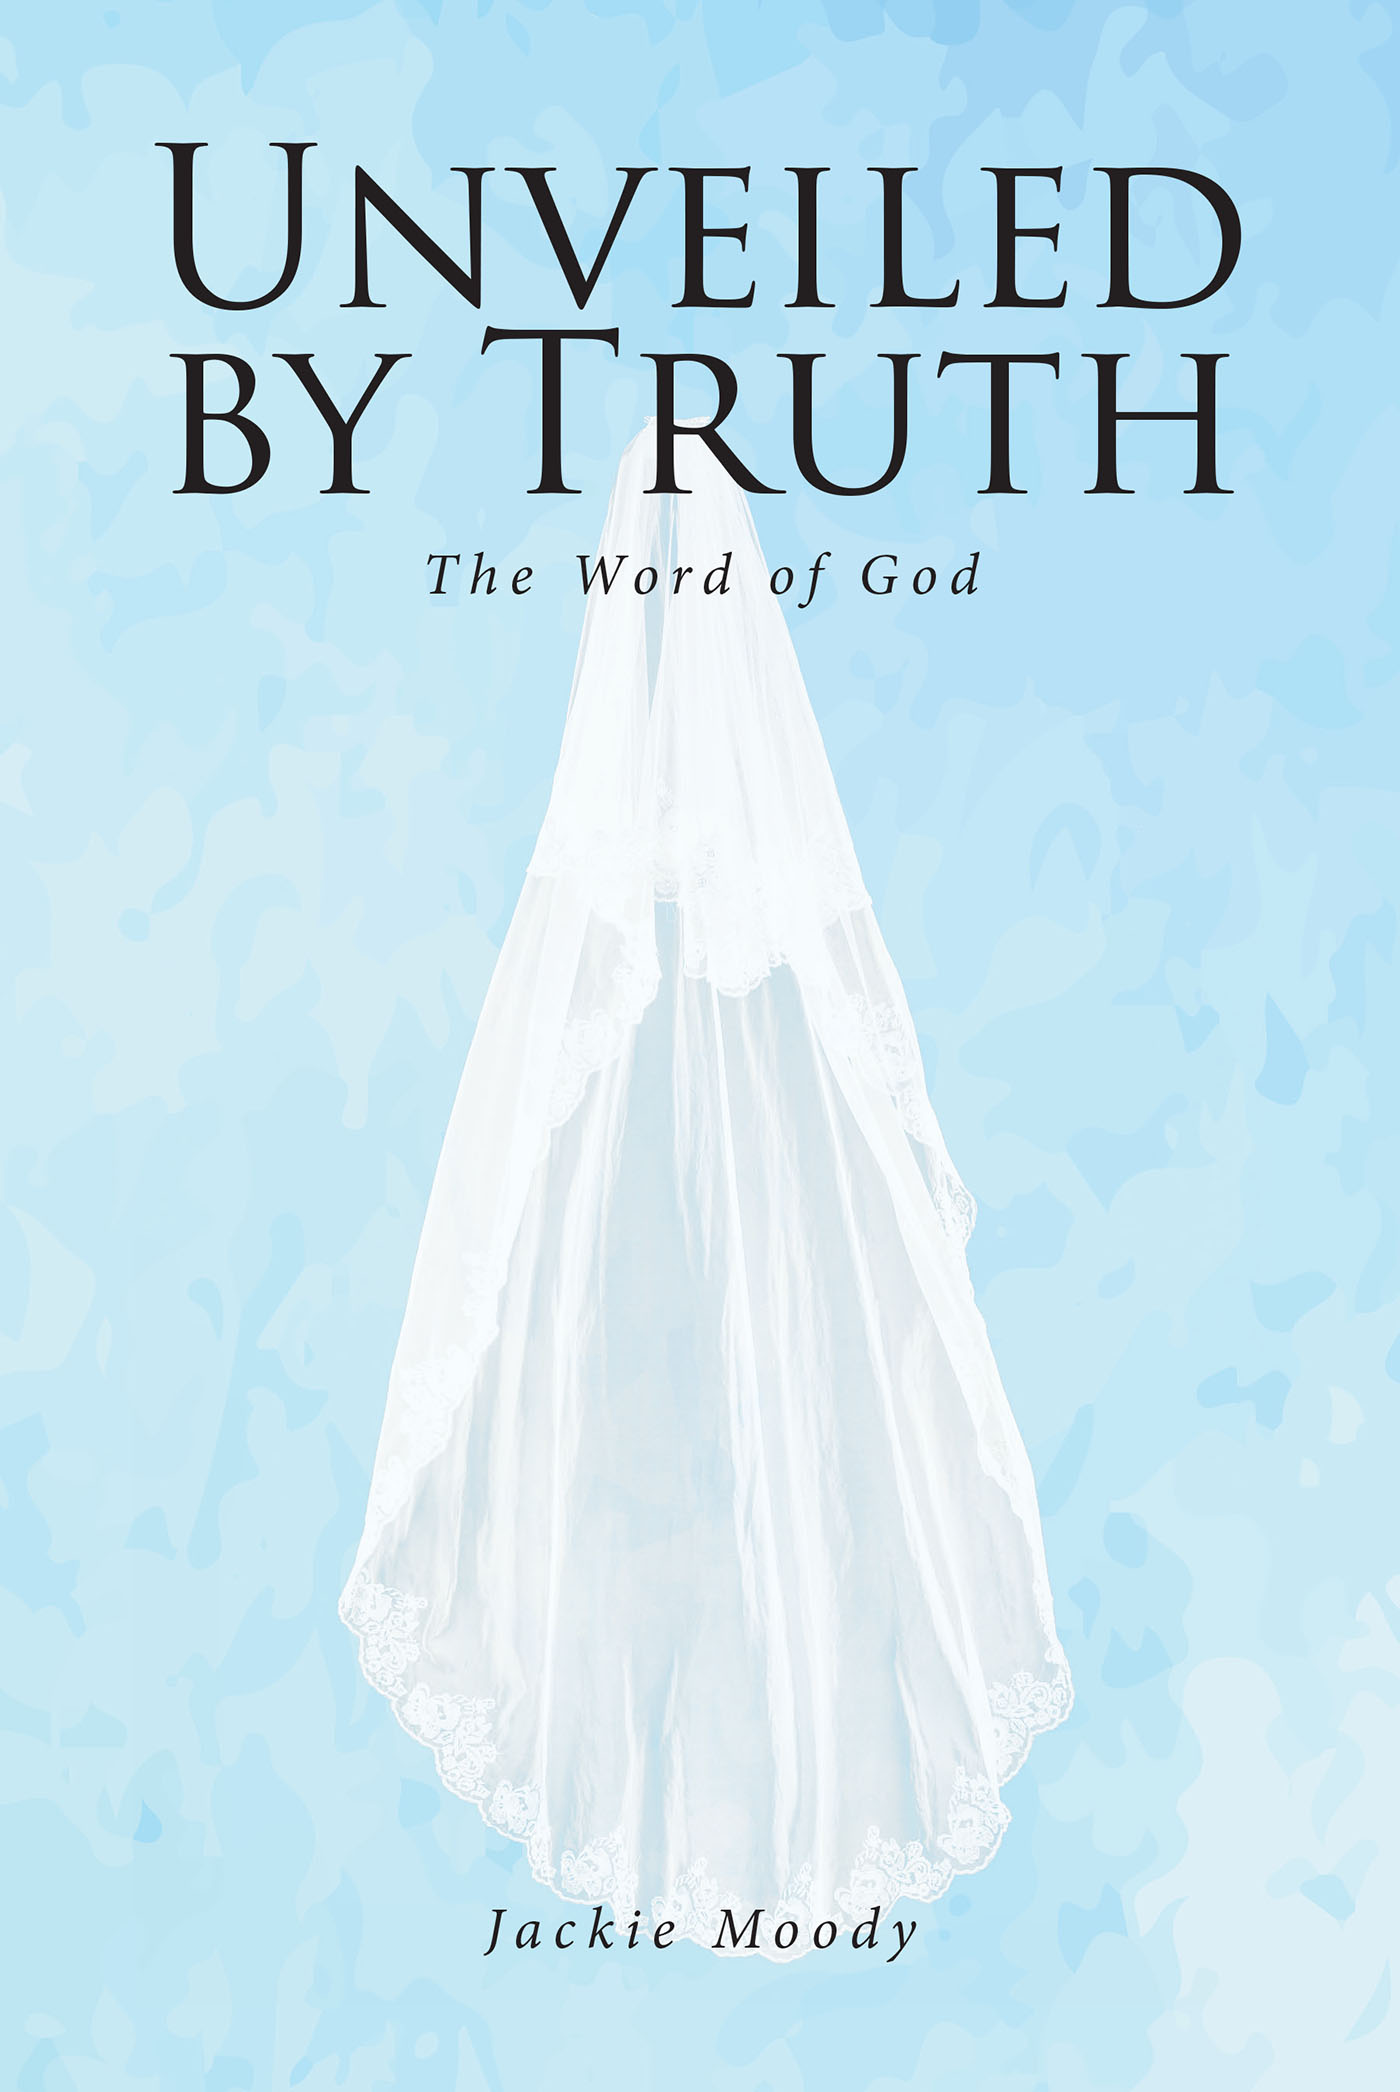 Jackie Moody’s Newly Released “Unveiled by Truth: The Word of God” is a Complex and Thoughtful Collection of Vibrant Poetry